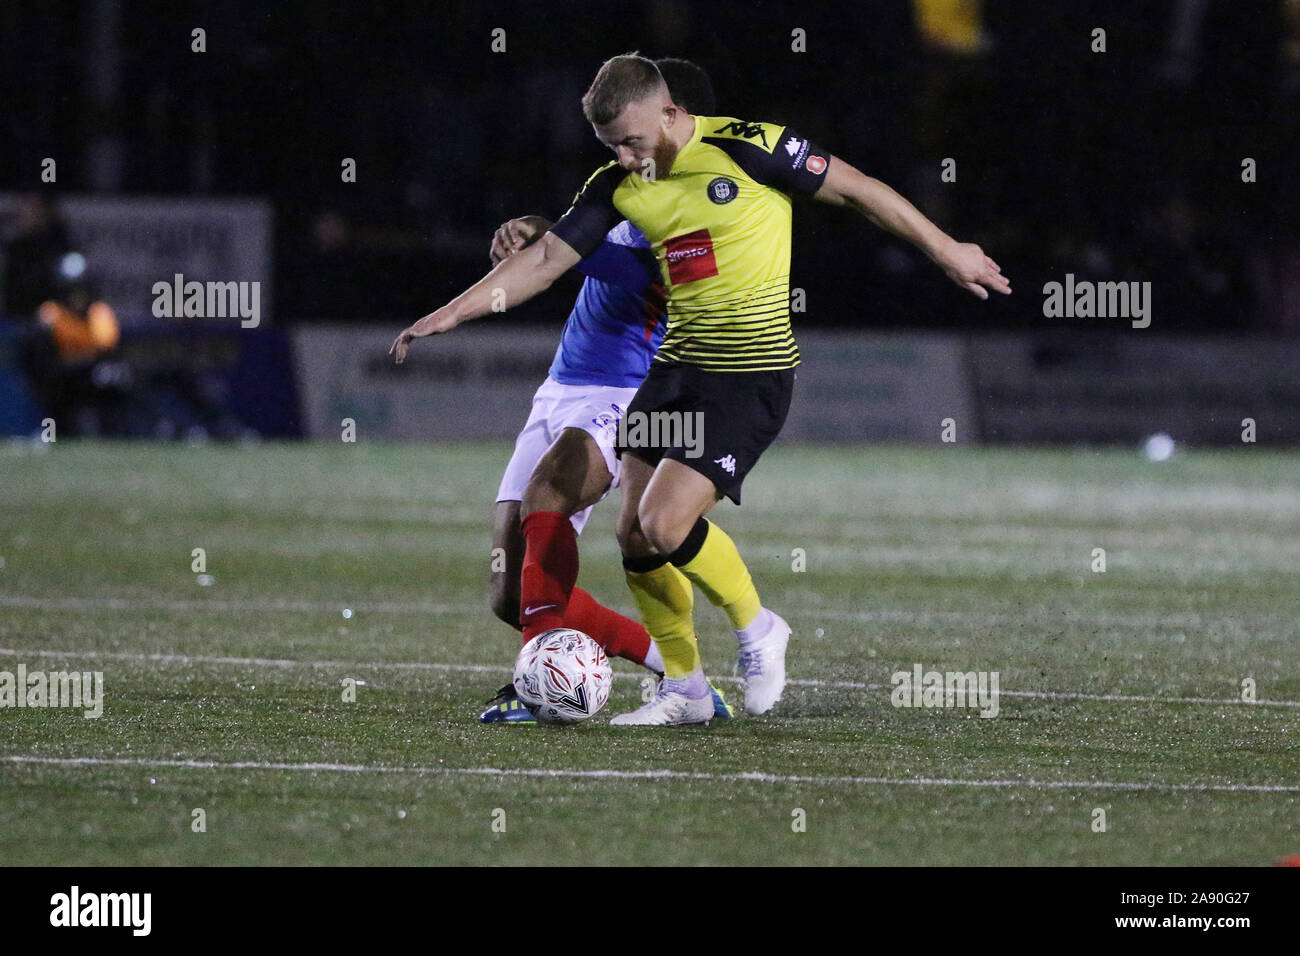 HARROGATE, ENGLAND - NOVEMBER 11TH George Thomson of Harrogate Town wins the ball during the FA Cup 1st round match between Harrogate Town and Portsmouth at Wetherby Road, Harrogate on Monday 11th November 2019. (Credit: Harry Cook | MI News) Photograph may only be used for newspaper and/or magazine editorial purposes, license required for commercial use Credit: MI News & Sport /Alamy Live News Stock Photo